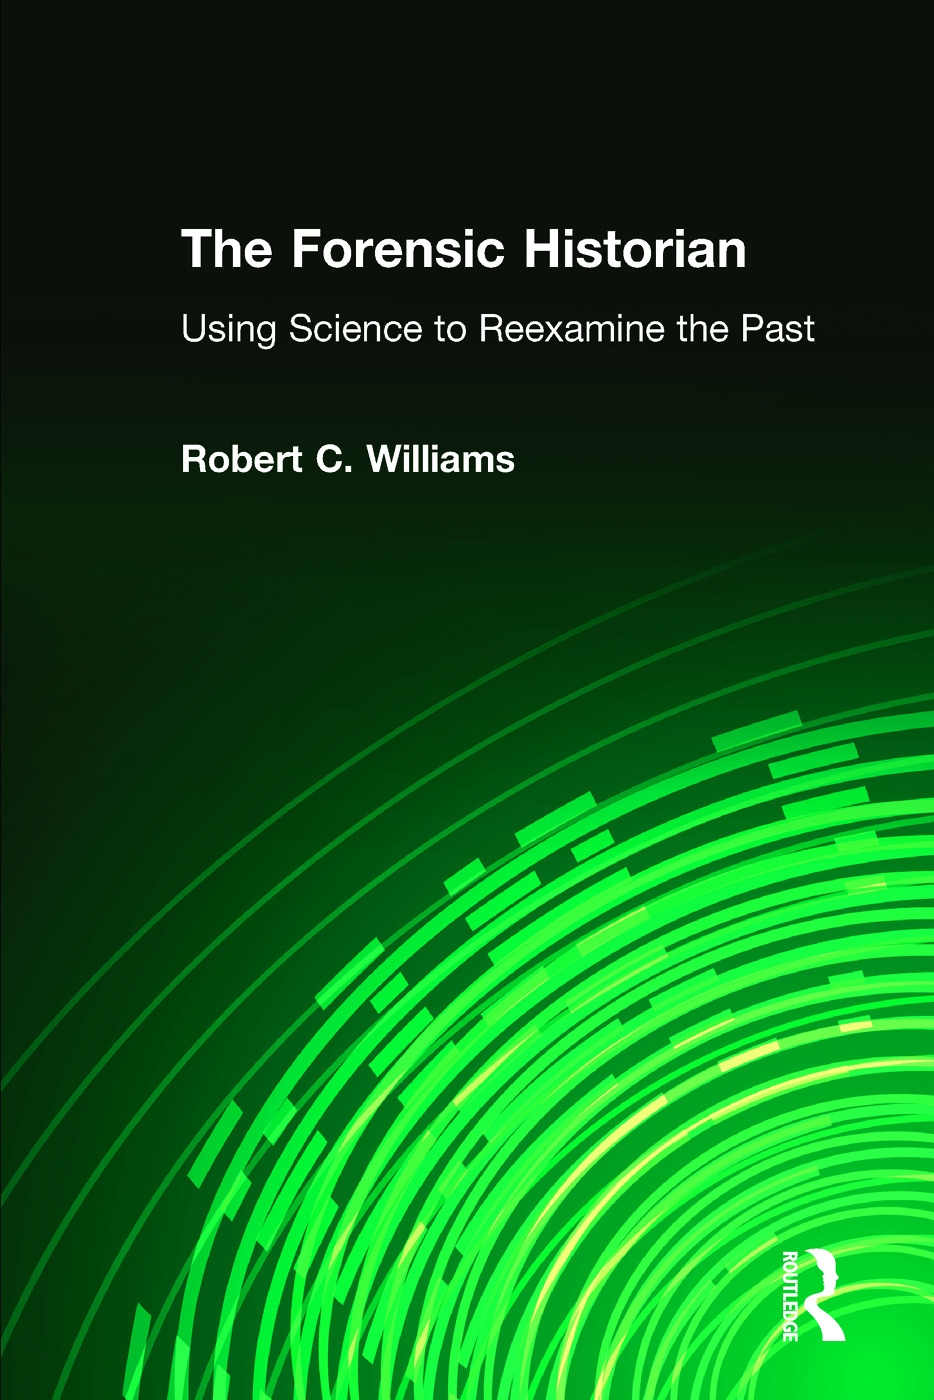 The Forensic Historian: Using Science to Reexamine the Past